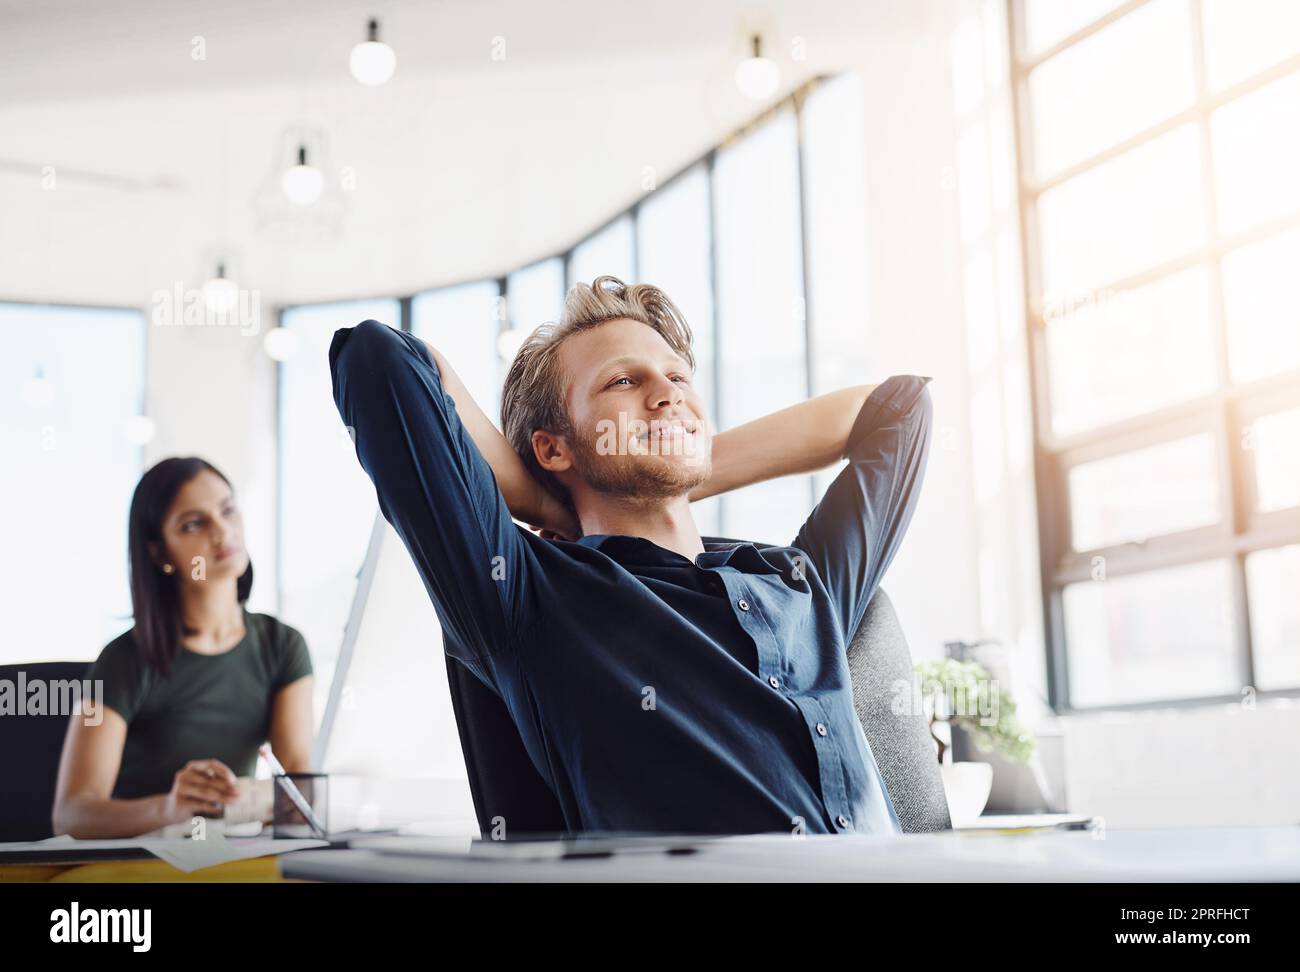 You cant help but smile when everything goes your way. a contented designer leaning back in his chair in a modern office. Stock Photo